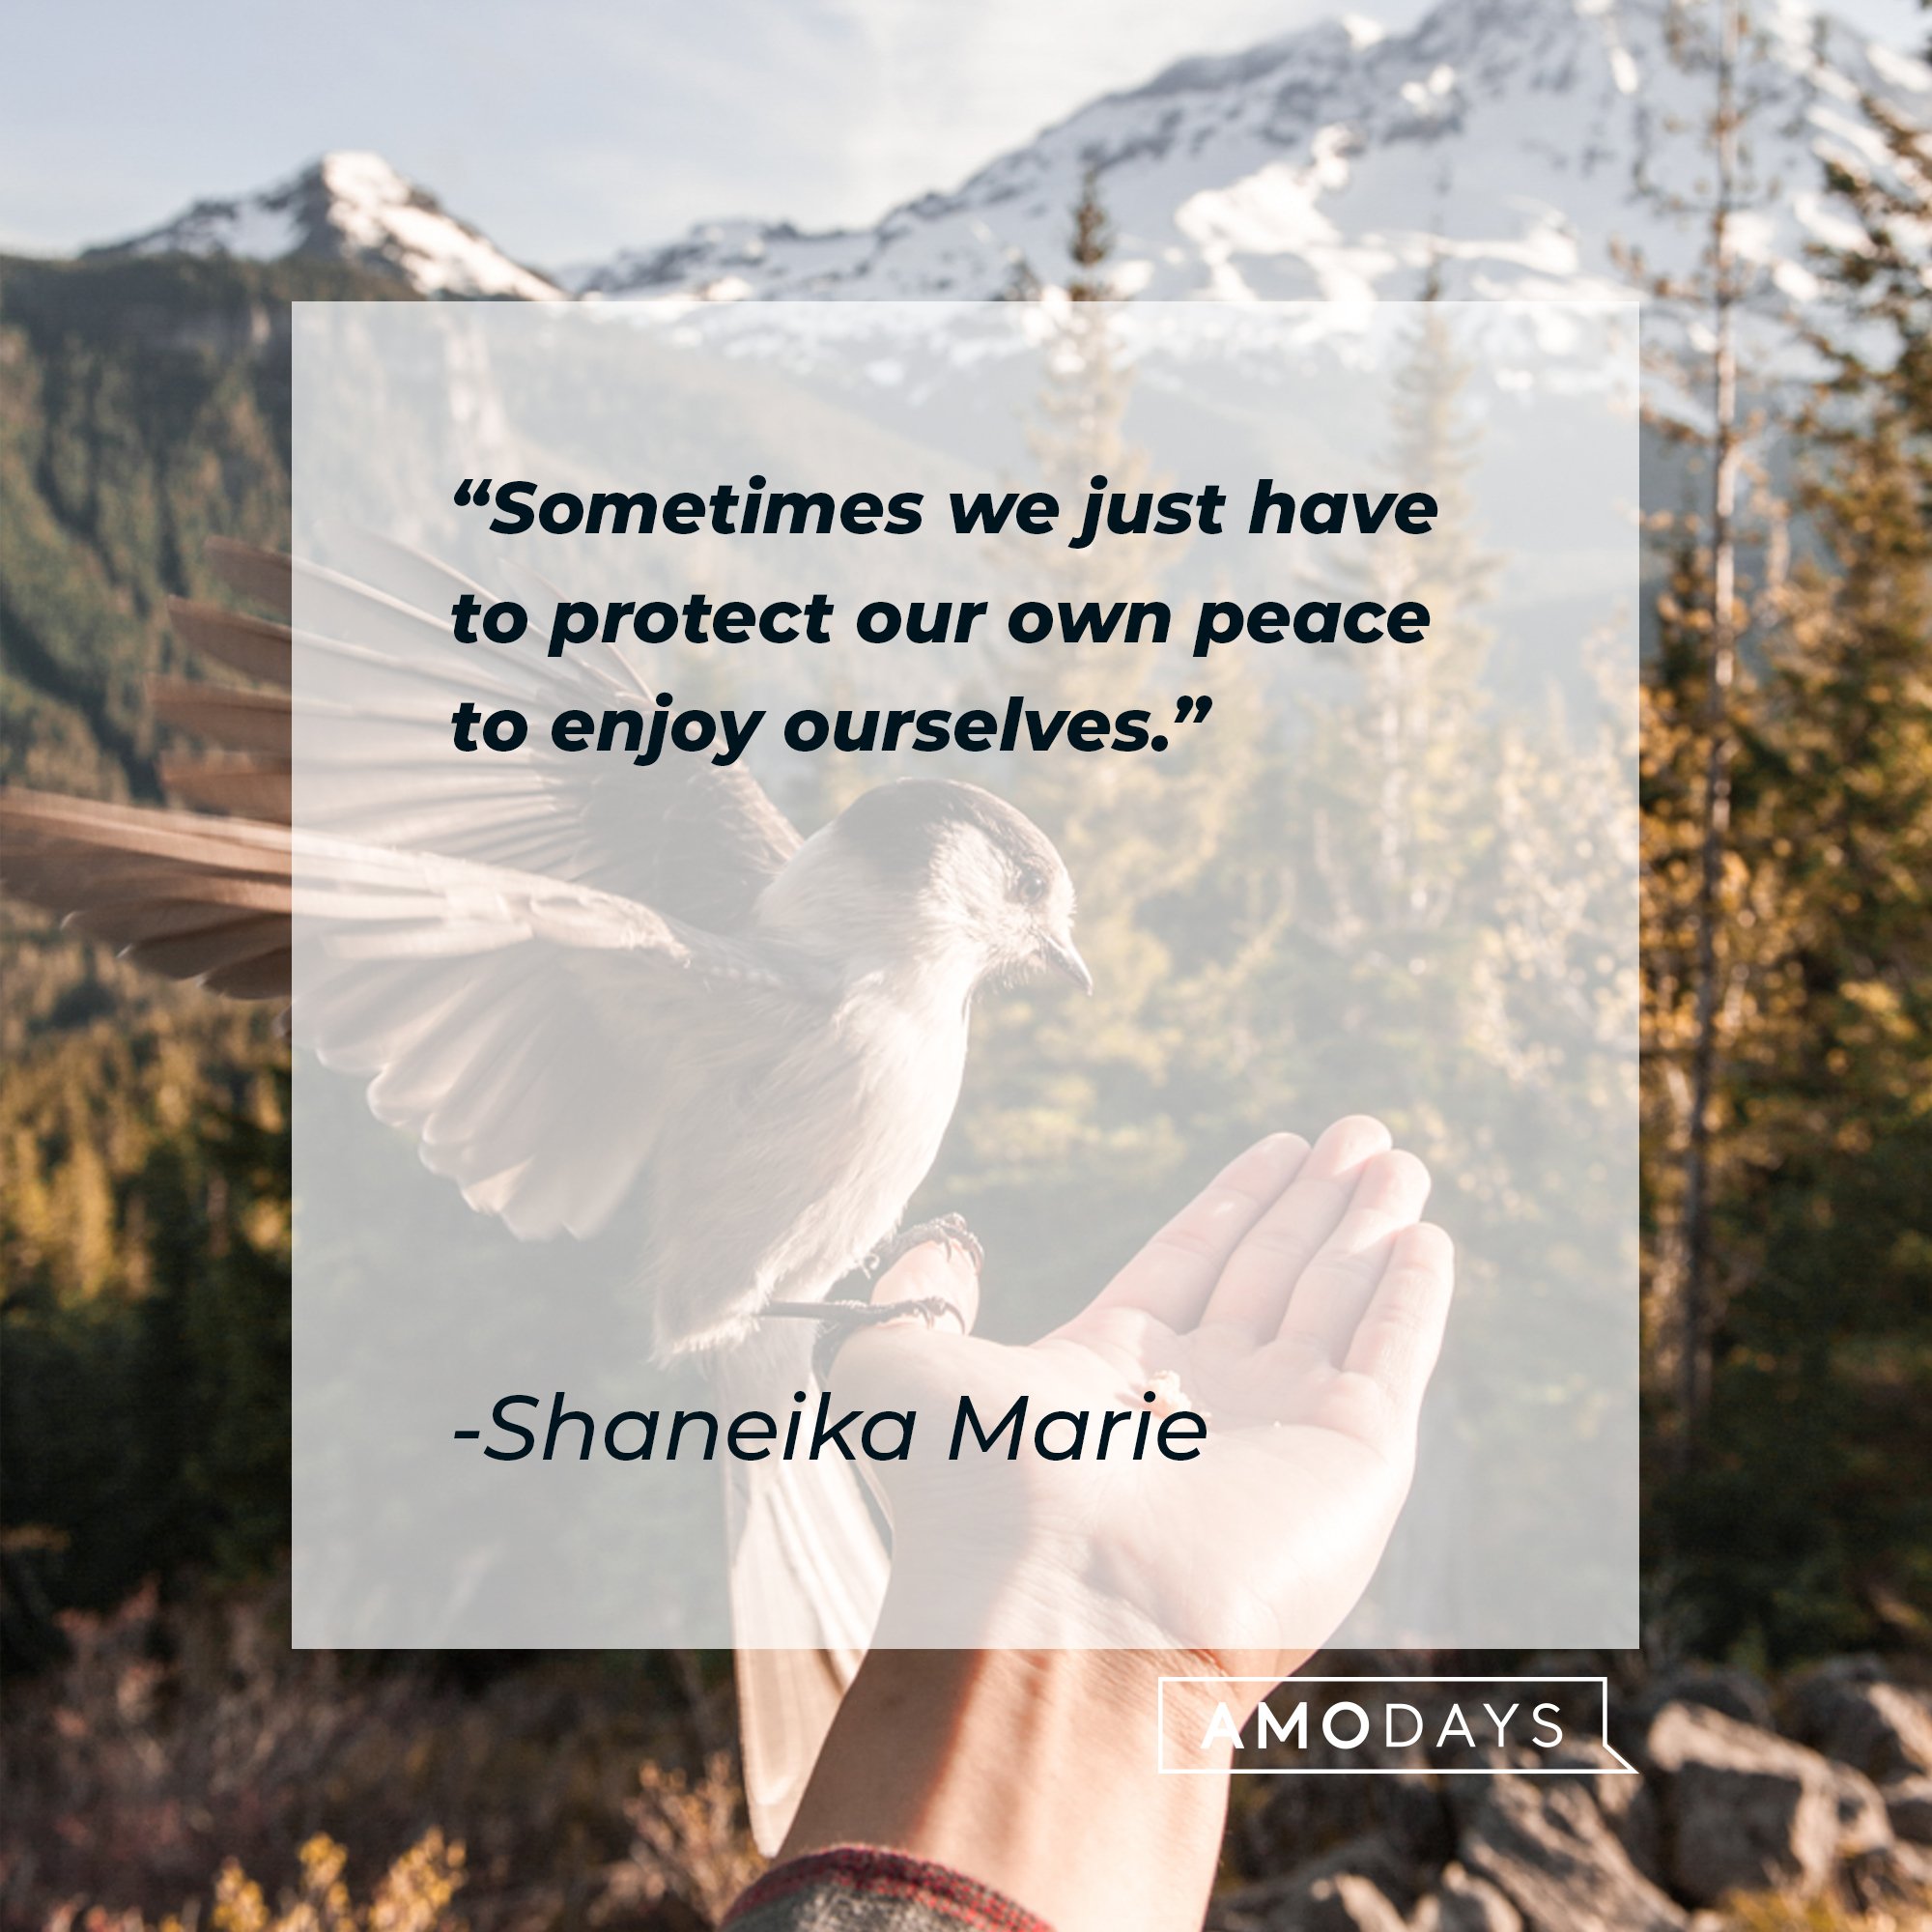 Shaneika Marie’s quote: "Sometimes we just have to protect our own peace to enjoy ourselves"  | Image: AmoDays